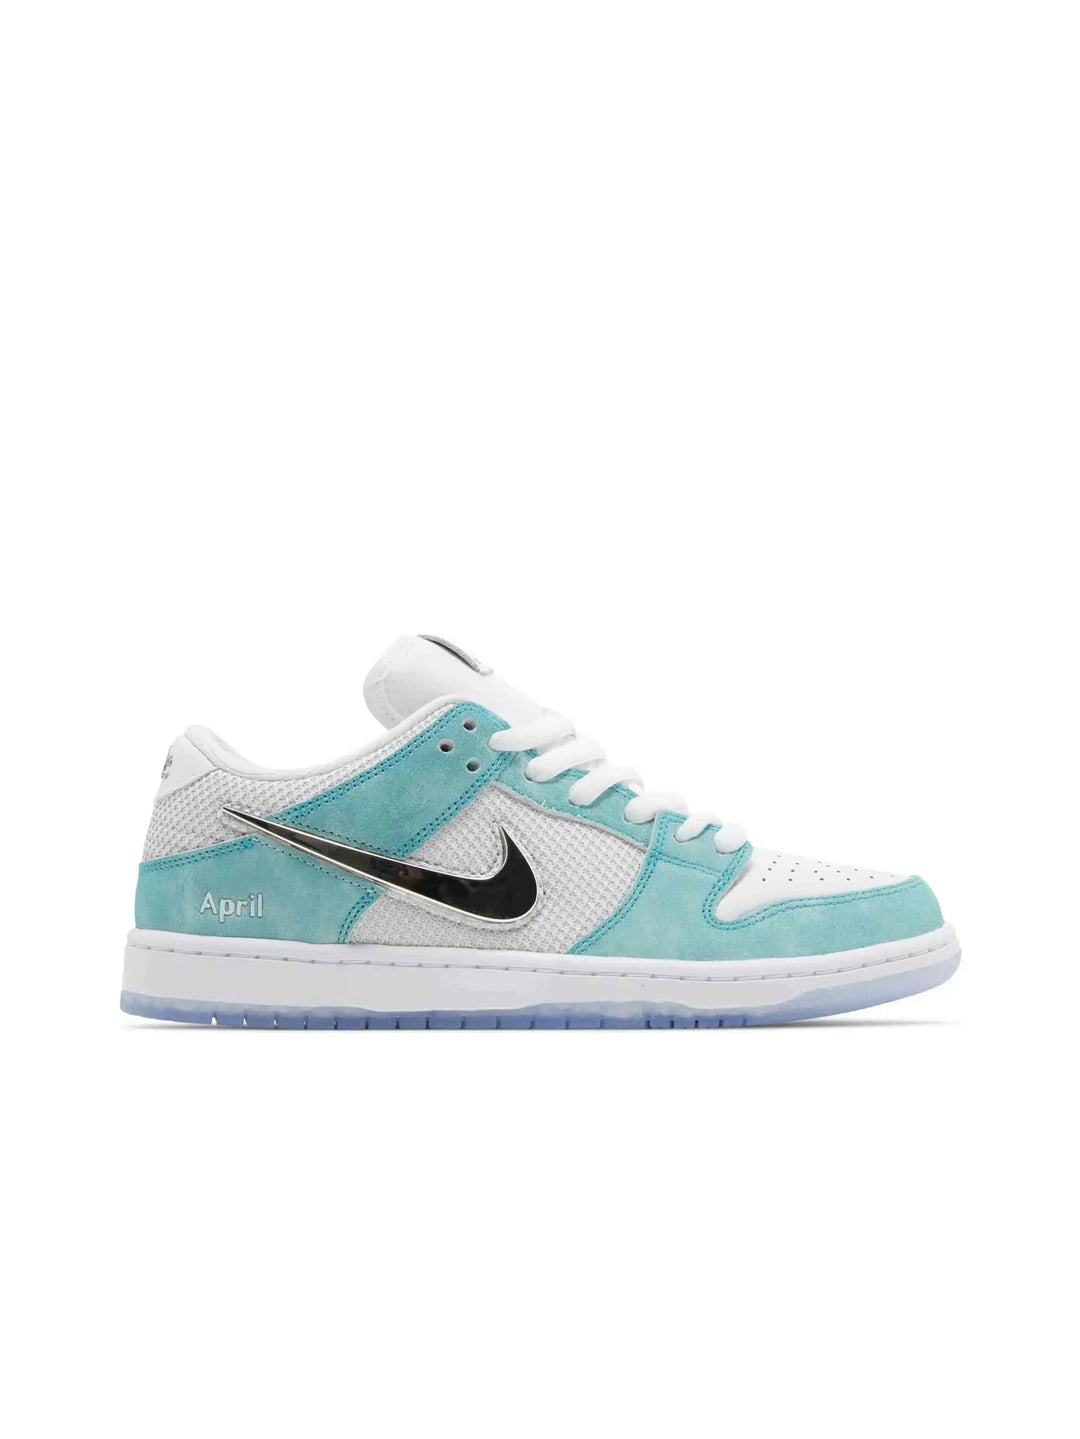 Nike SB Dunk Low April Skateboards in Auckland, New Zealand - Shop name